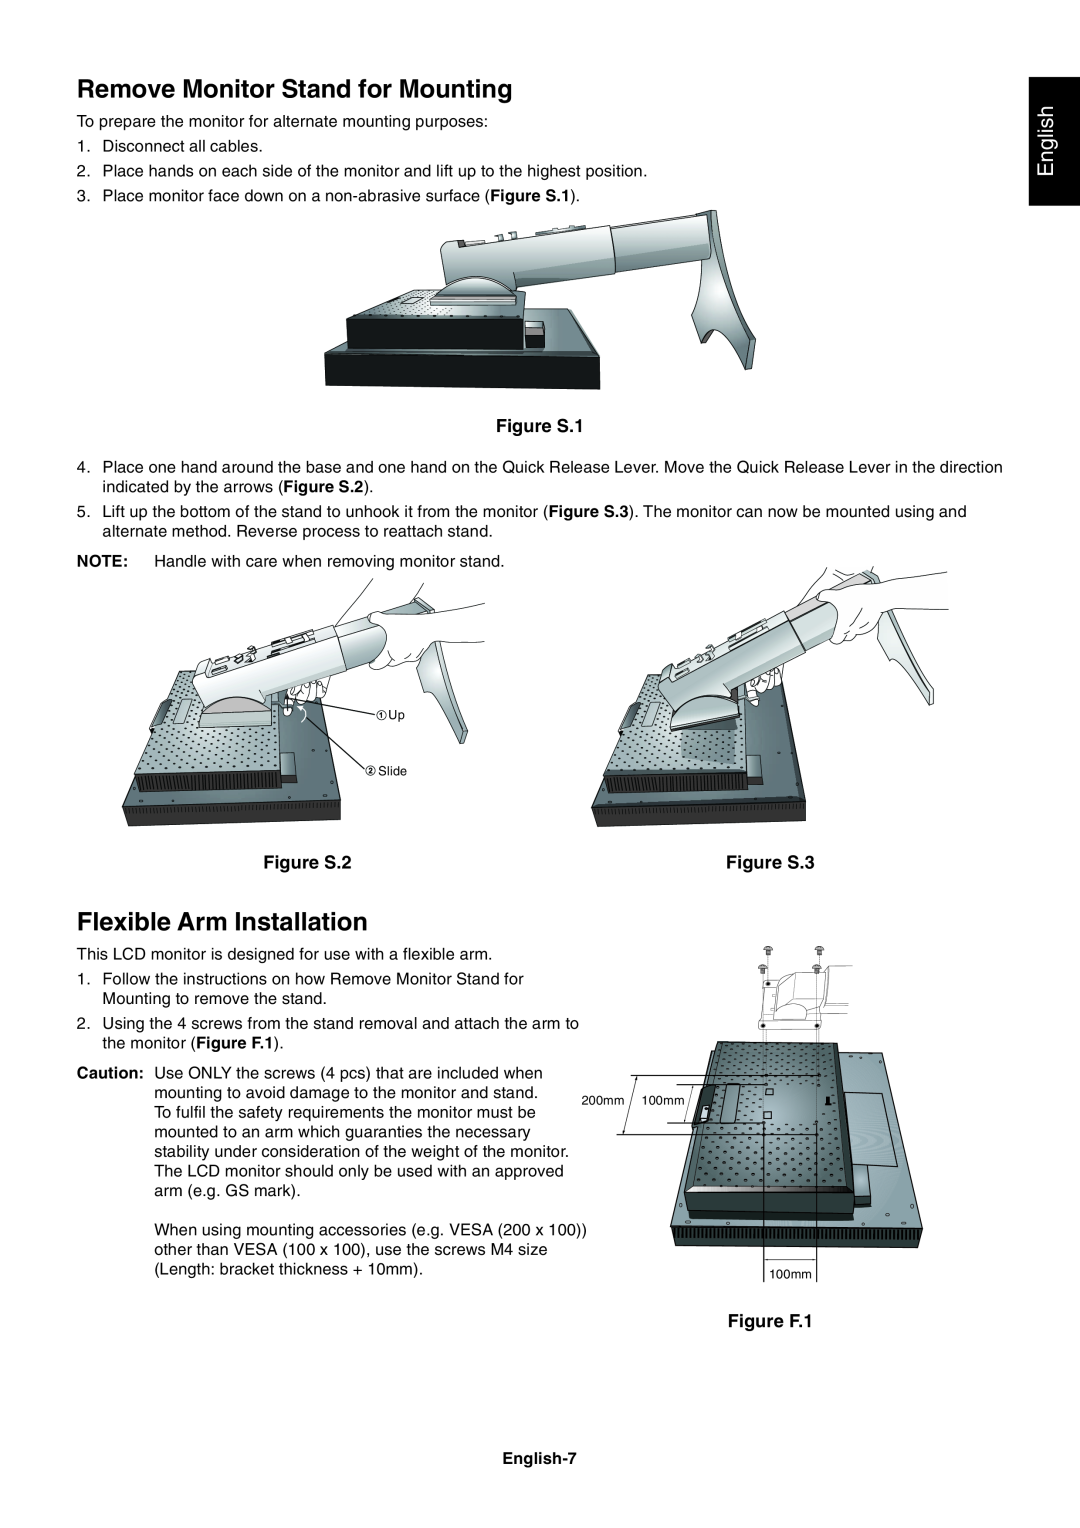 NEC 2690 Remove Monitor Stand for Mounting, Flexible Arm Installation, English, Figure S.1, Figure S.2, Figure S.3 